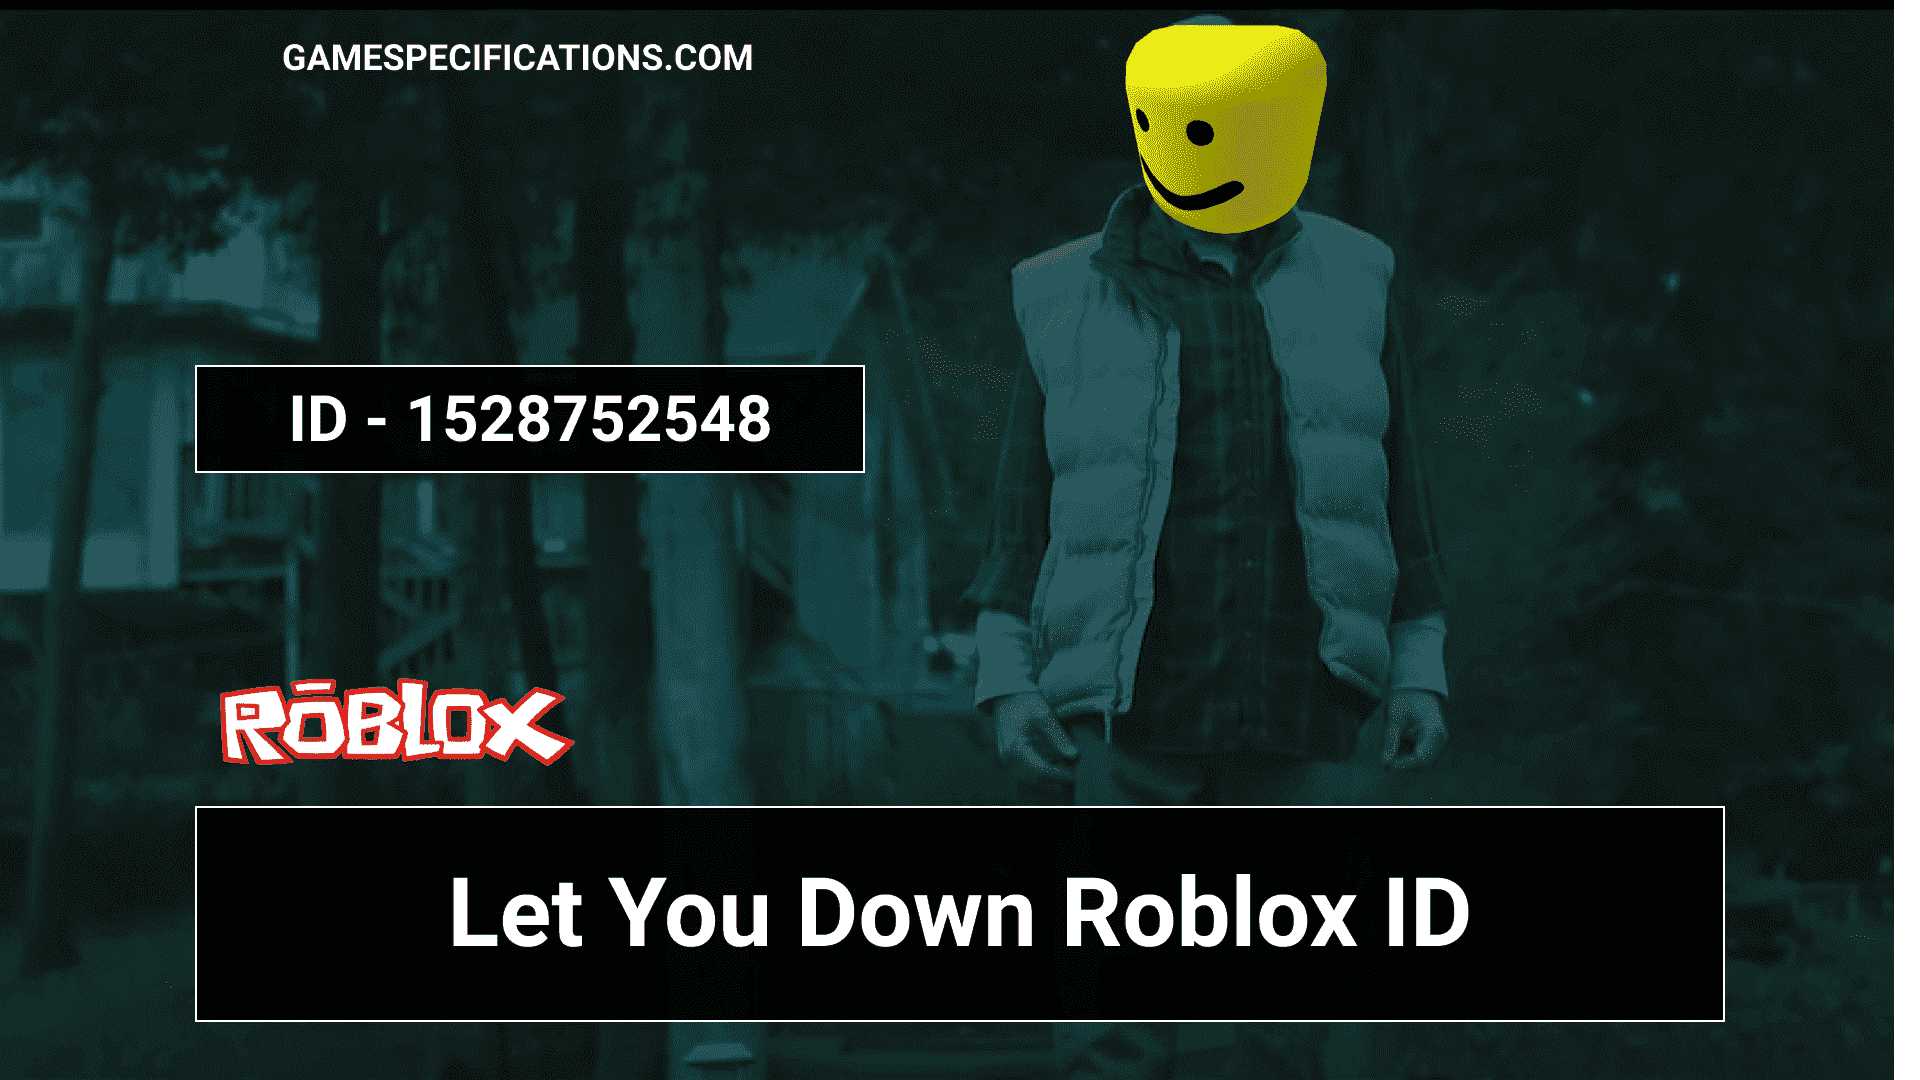 Let You Down Roblox Id Codes To Play The Nf Music 2021 Game Specifications - all my friends are dead roblox code